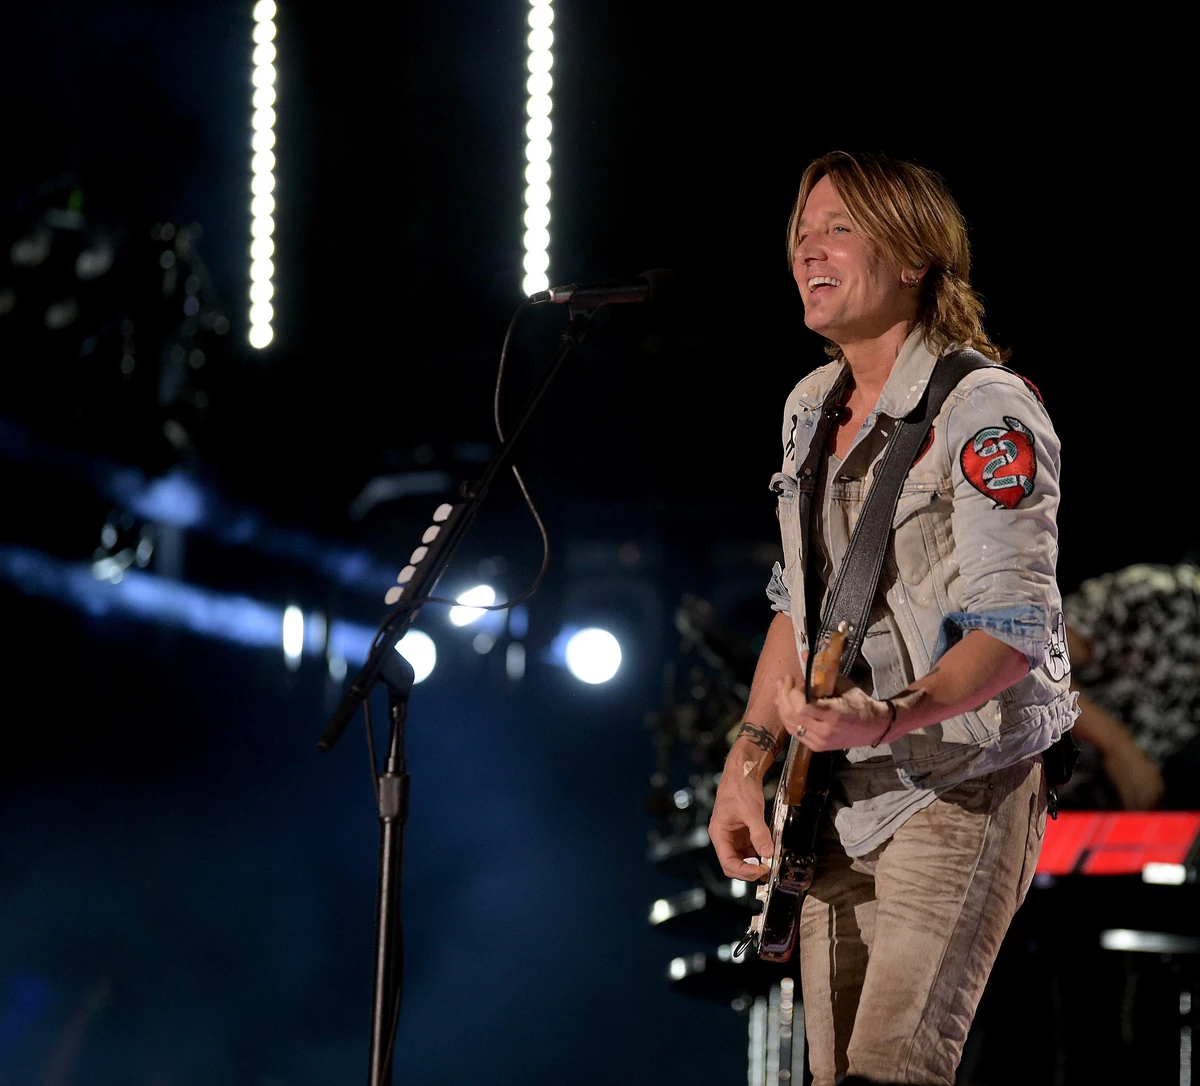 Keith Urban's Home' on 'CMA Fest' Special Is FanPleasing